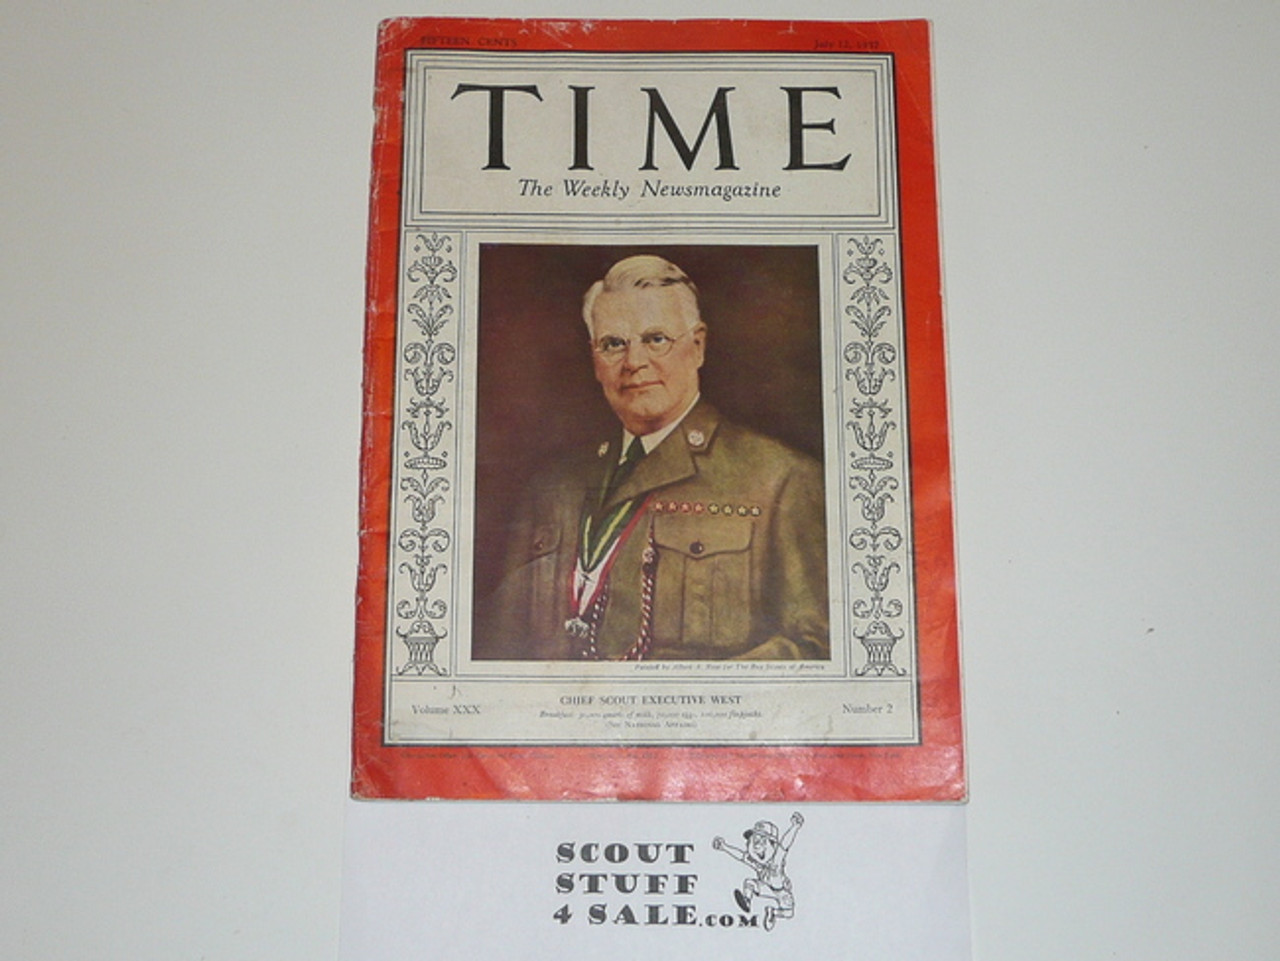 1937 Time Magazine With James West on the Cover